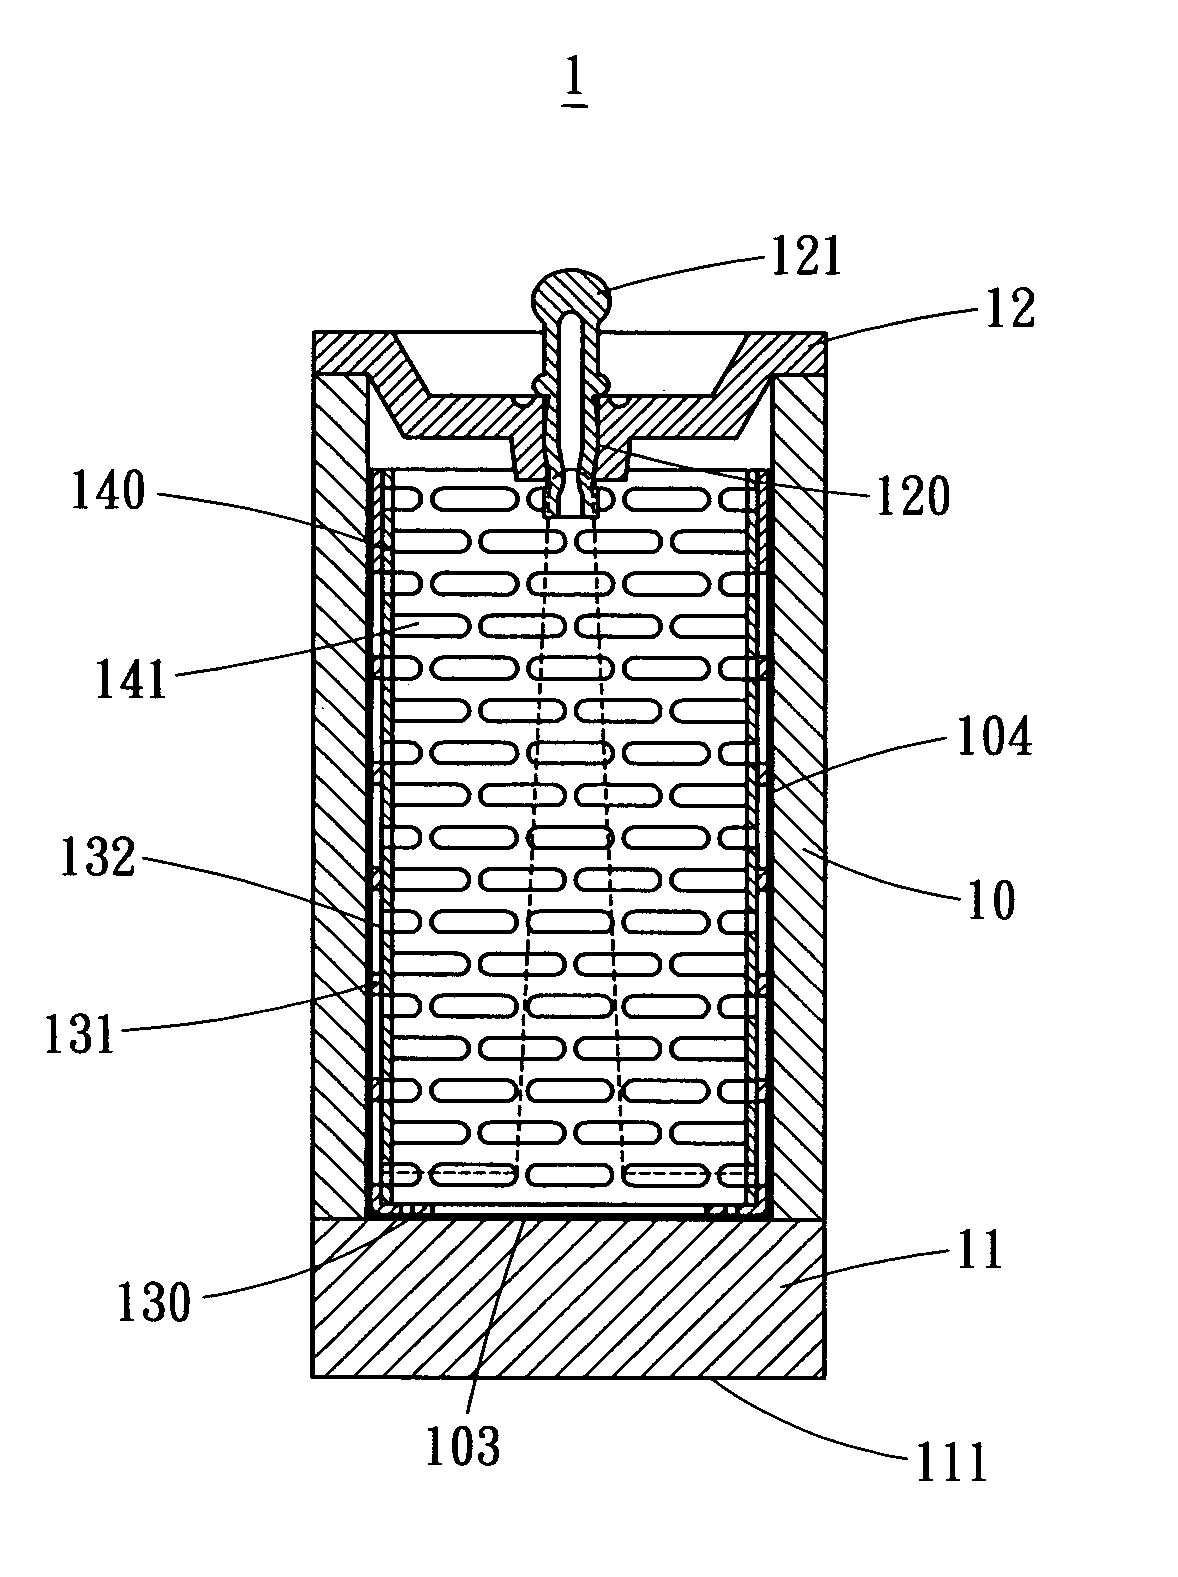 Heat pipe structure